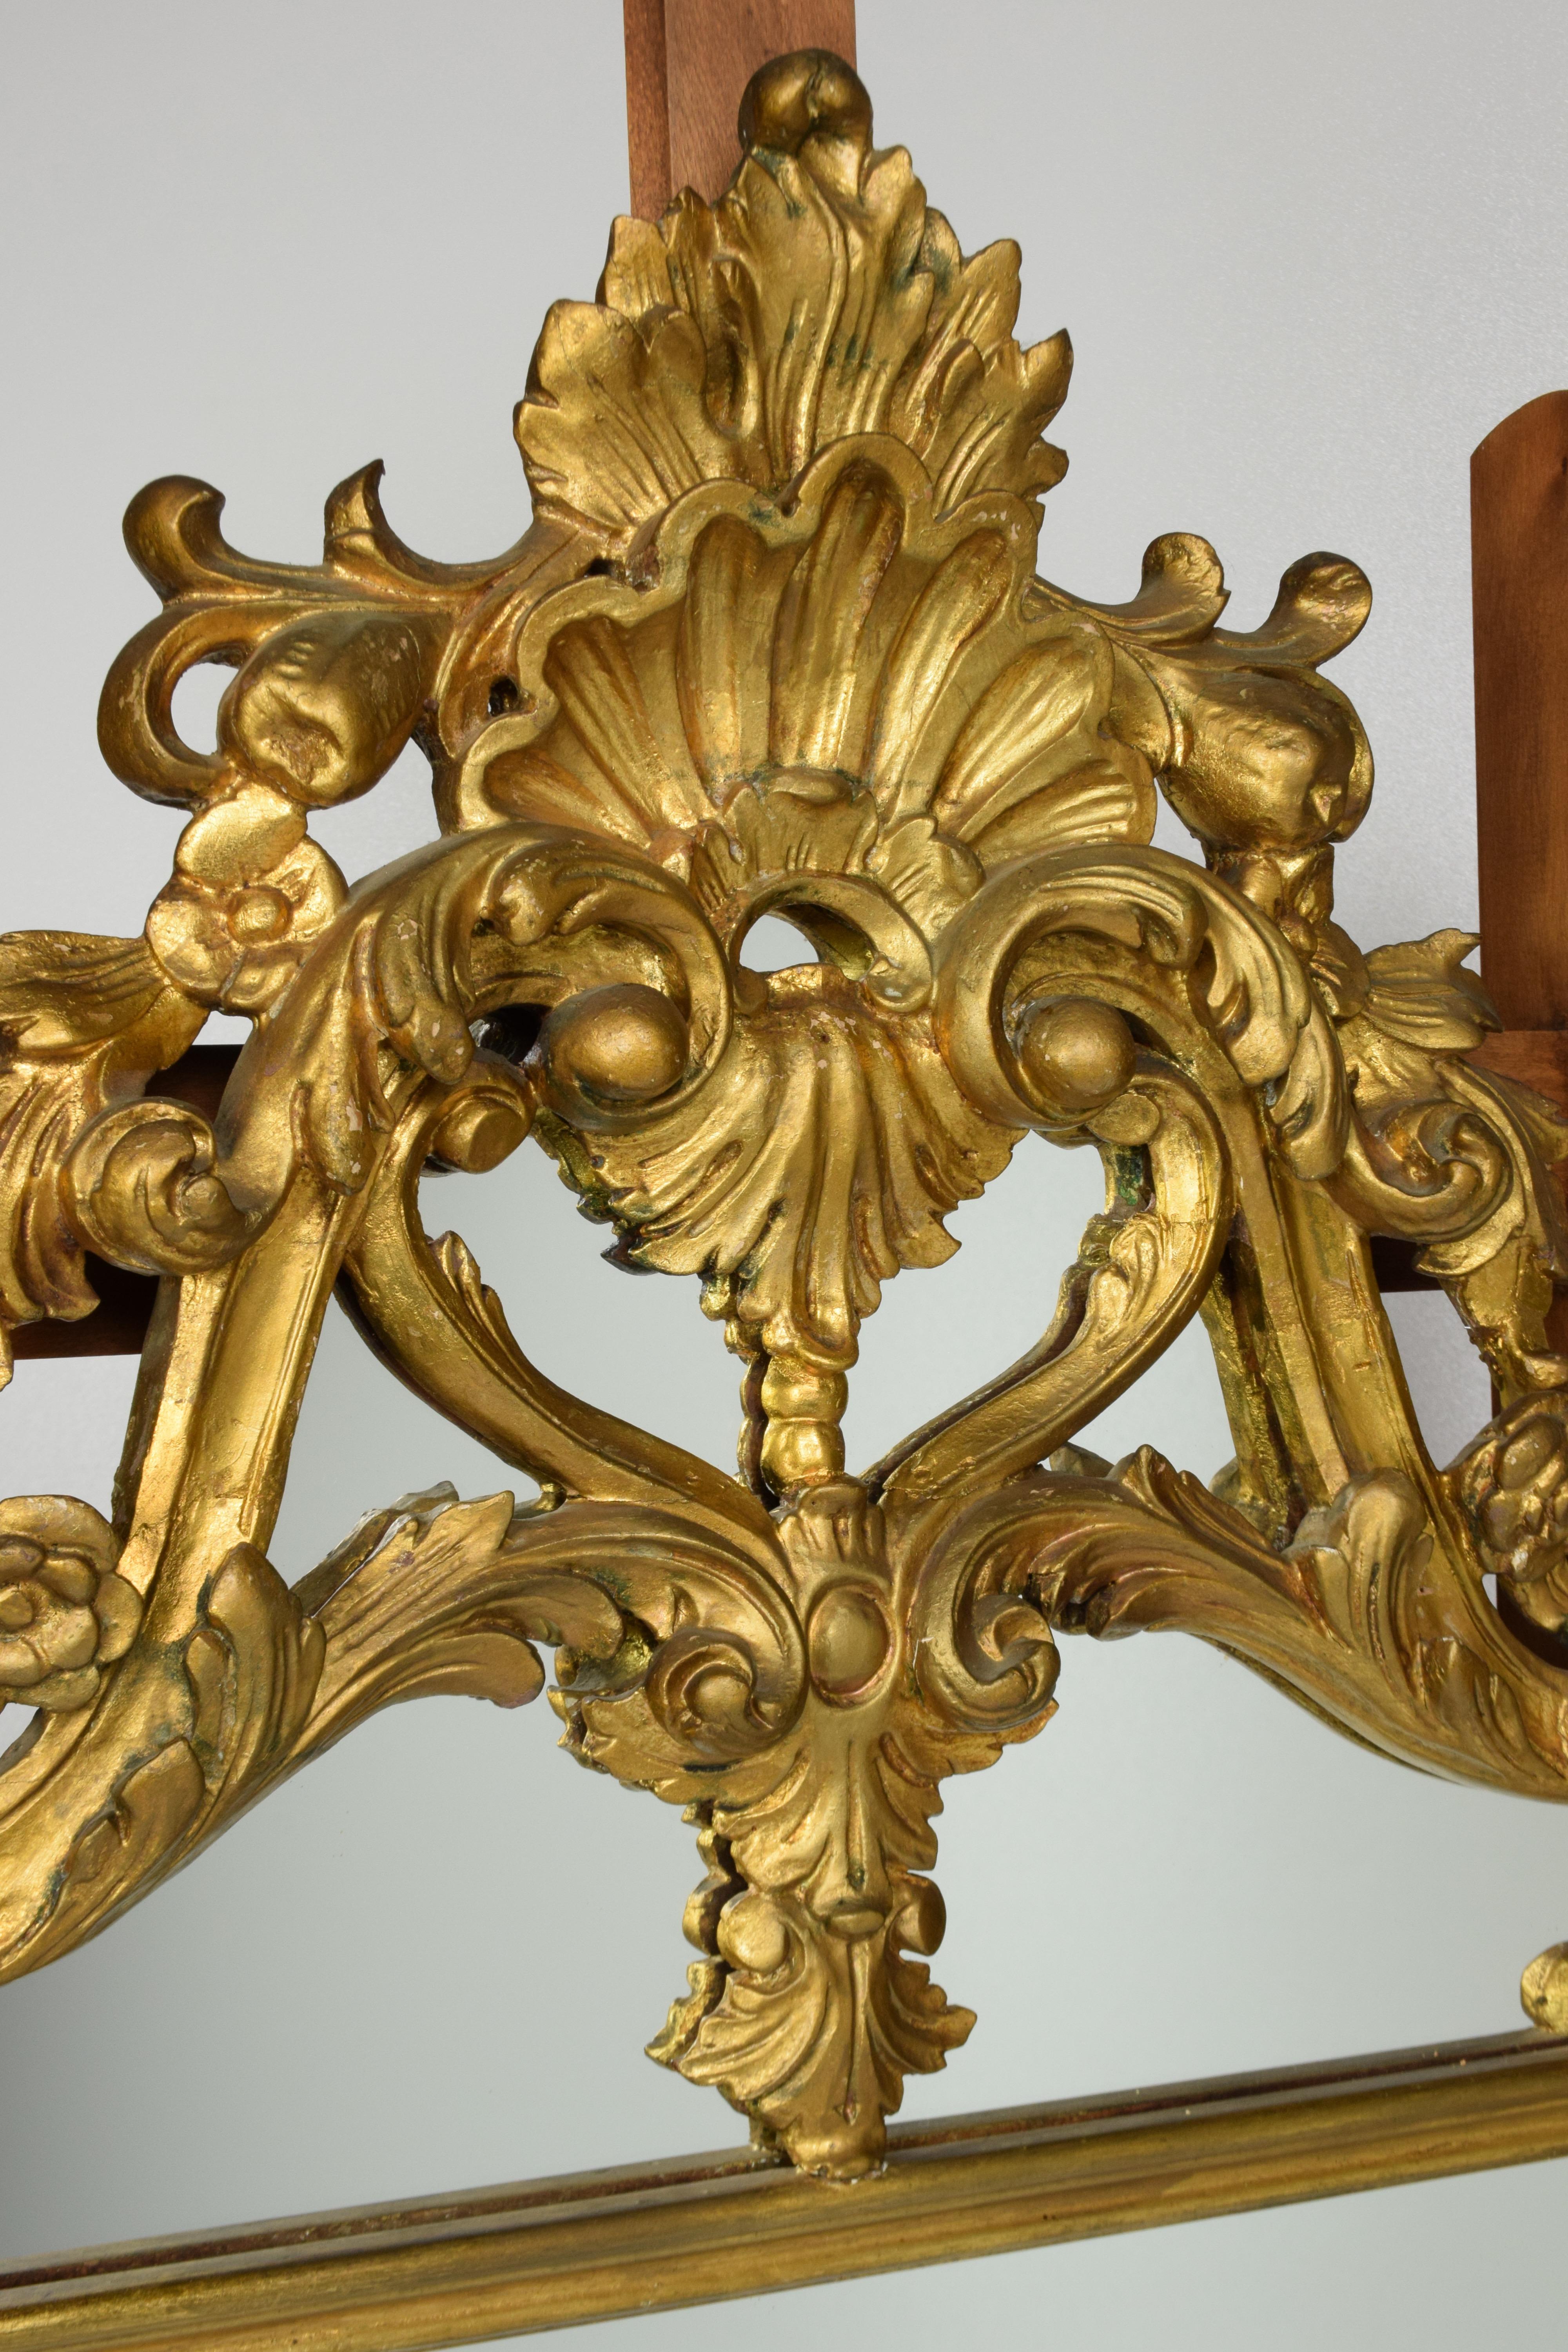 Florentine craftsmanship, circa 1950
in 18th century style
in carved and gilded wood
Dimensions: Height 135 cm, width 80 cm.